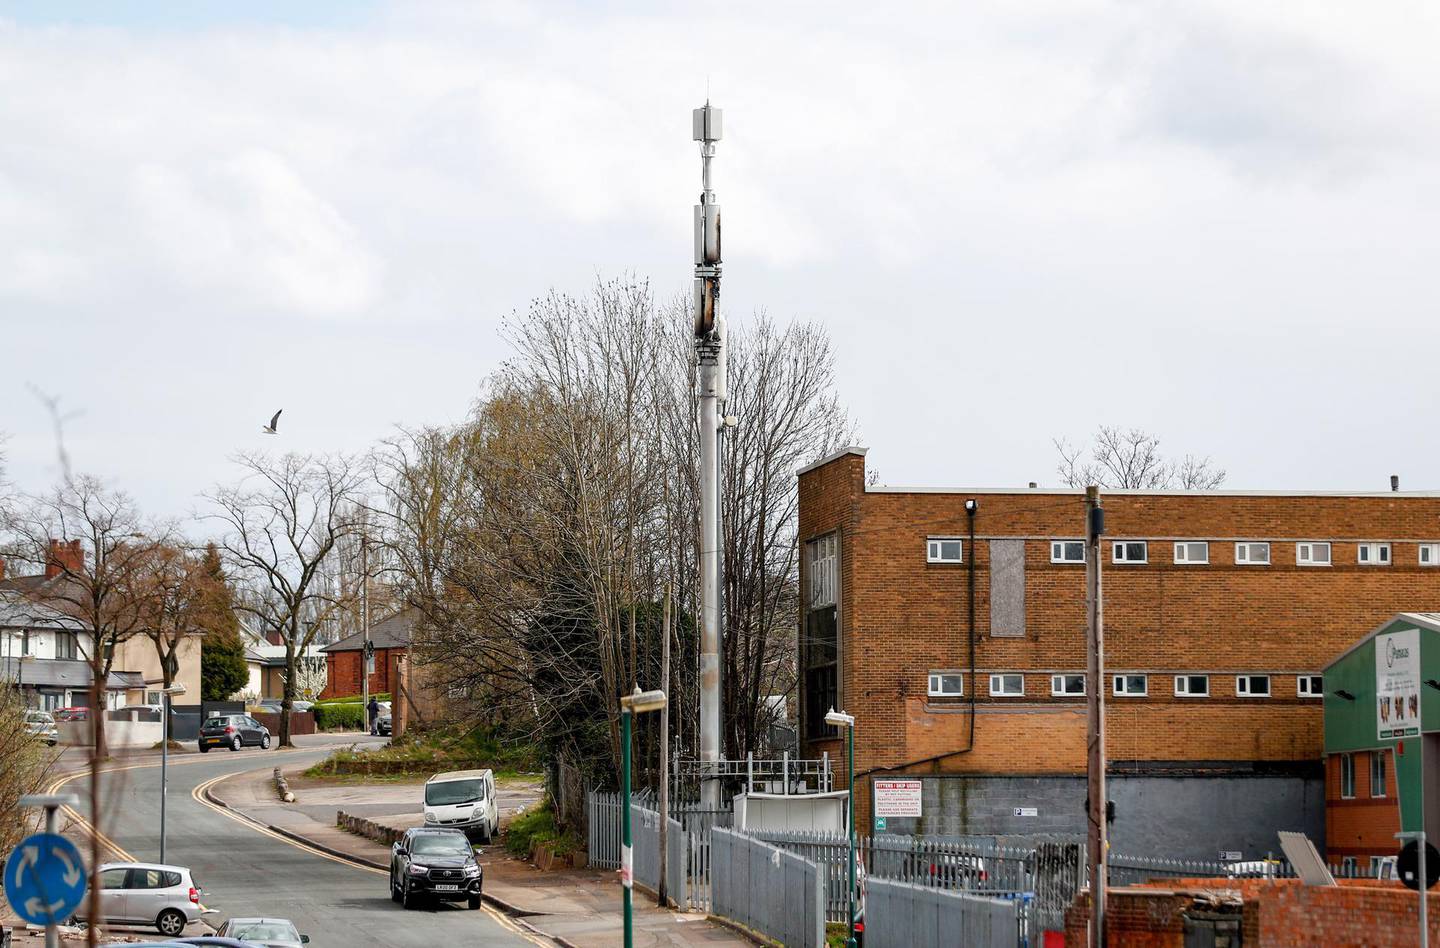 A fire-damaged telecom tower, reported in local media as being a 5G network mast on the EE network, operated by BT Group Plc, stands in Birmingham, U.K., on Monday, April 6, 2020. Telecom masts that enable the next generation of wireless communication were set on fire in the U.K. in recent days, apparently by people motivated by a theory that the tech helps spread the coronavirus. Photographer: Darren Staples/Bloomberg